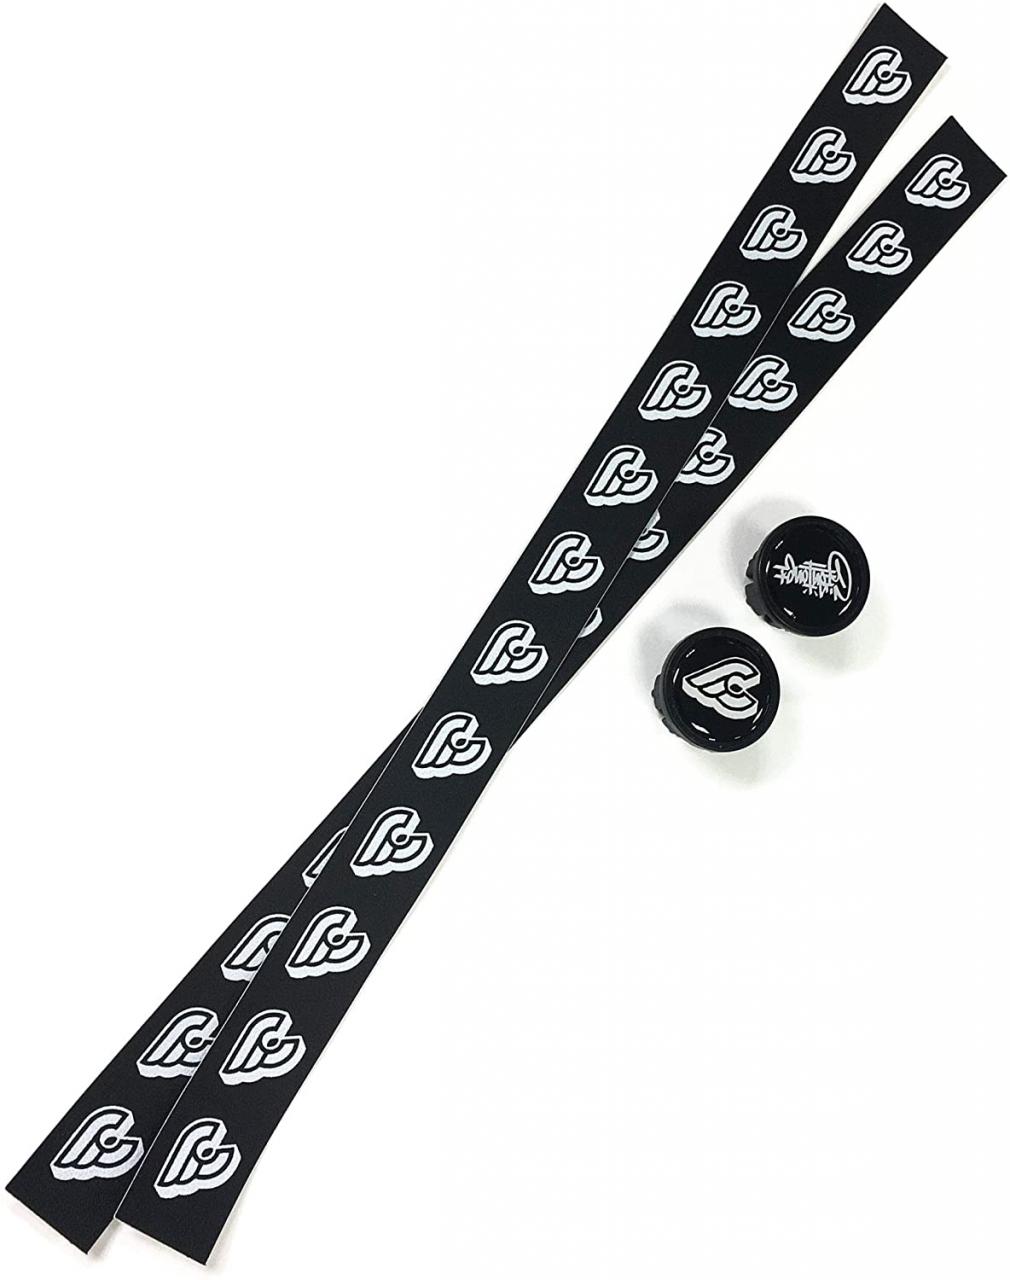 Buy Cinelli Special Edition Handlebar Tape Online in South Korea. B004X4P856